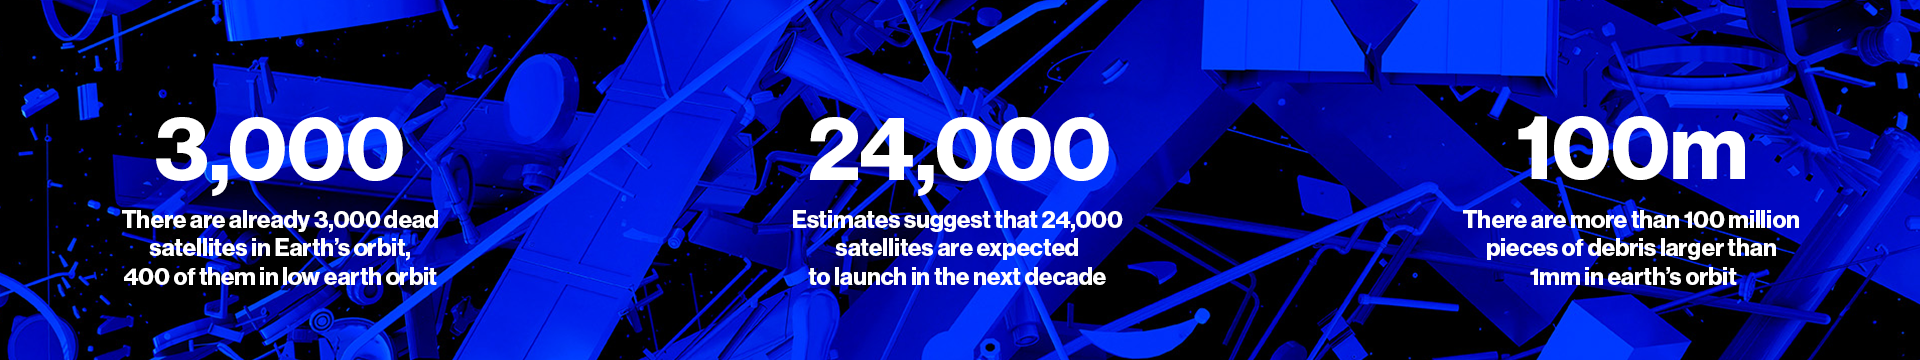 There are already 3,000 dead satellites in Earth's orbit, 400 of them in low earth orbit.
Estimates suggest that 24,000 satellites are expected to launch in the next decade.
There are more than 100 million pieces of debris larger than 1mm in earth's orbit. 